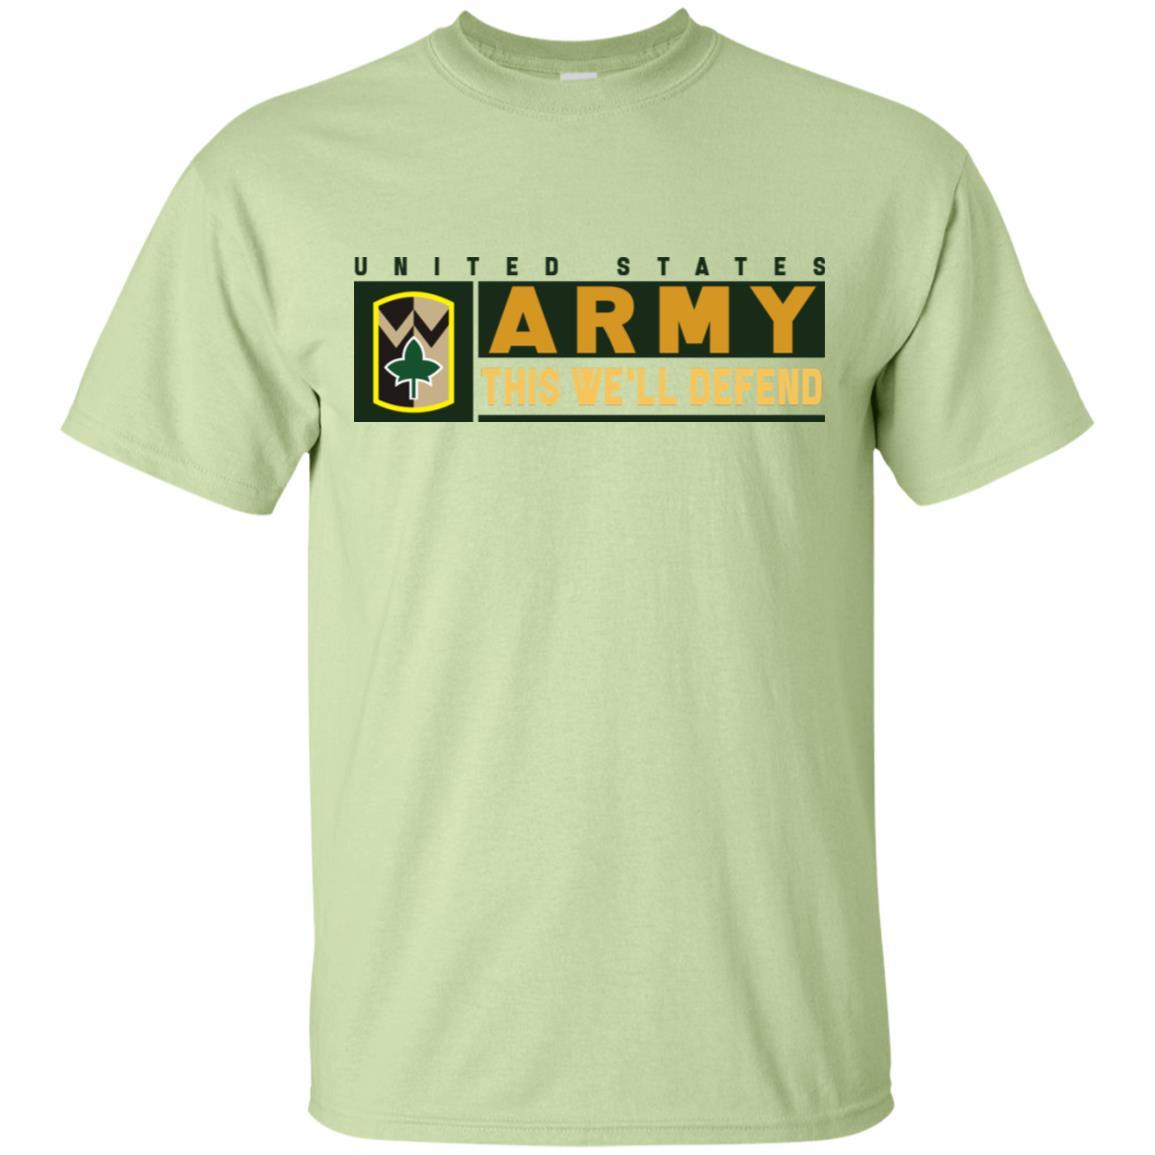 US Army 4TH SUSTAINMENT BRIGADE- This We'll Defend T-Shirt On Front For Men-TShirt-Army-Veterans Nation